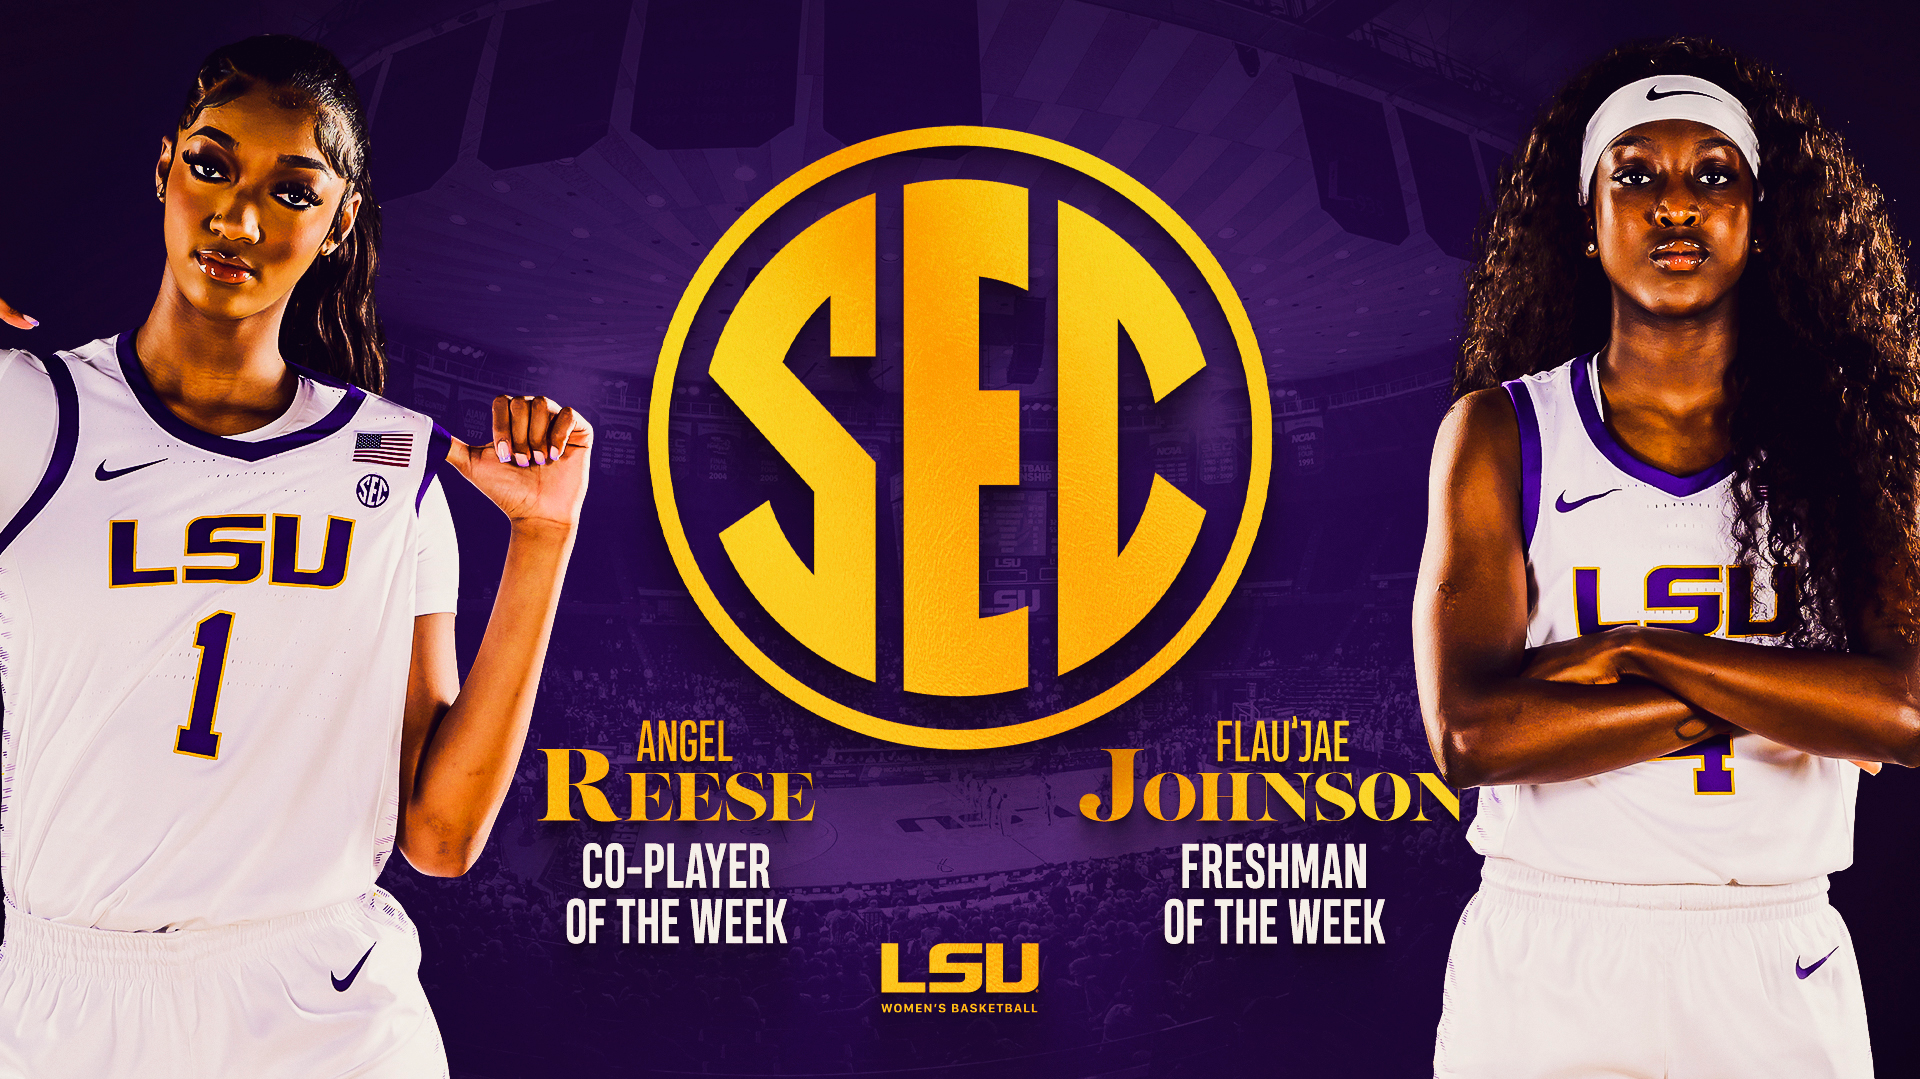 Lsu S Reese Named Sec Co Player Of The Week Johnson Freshman